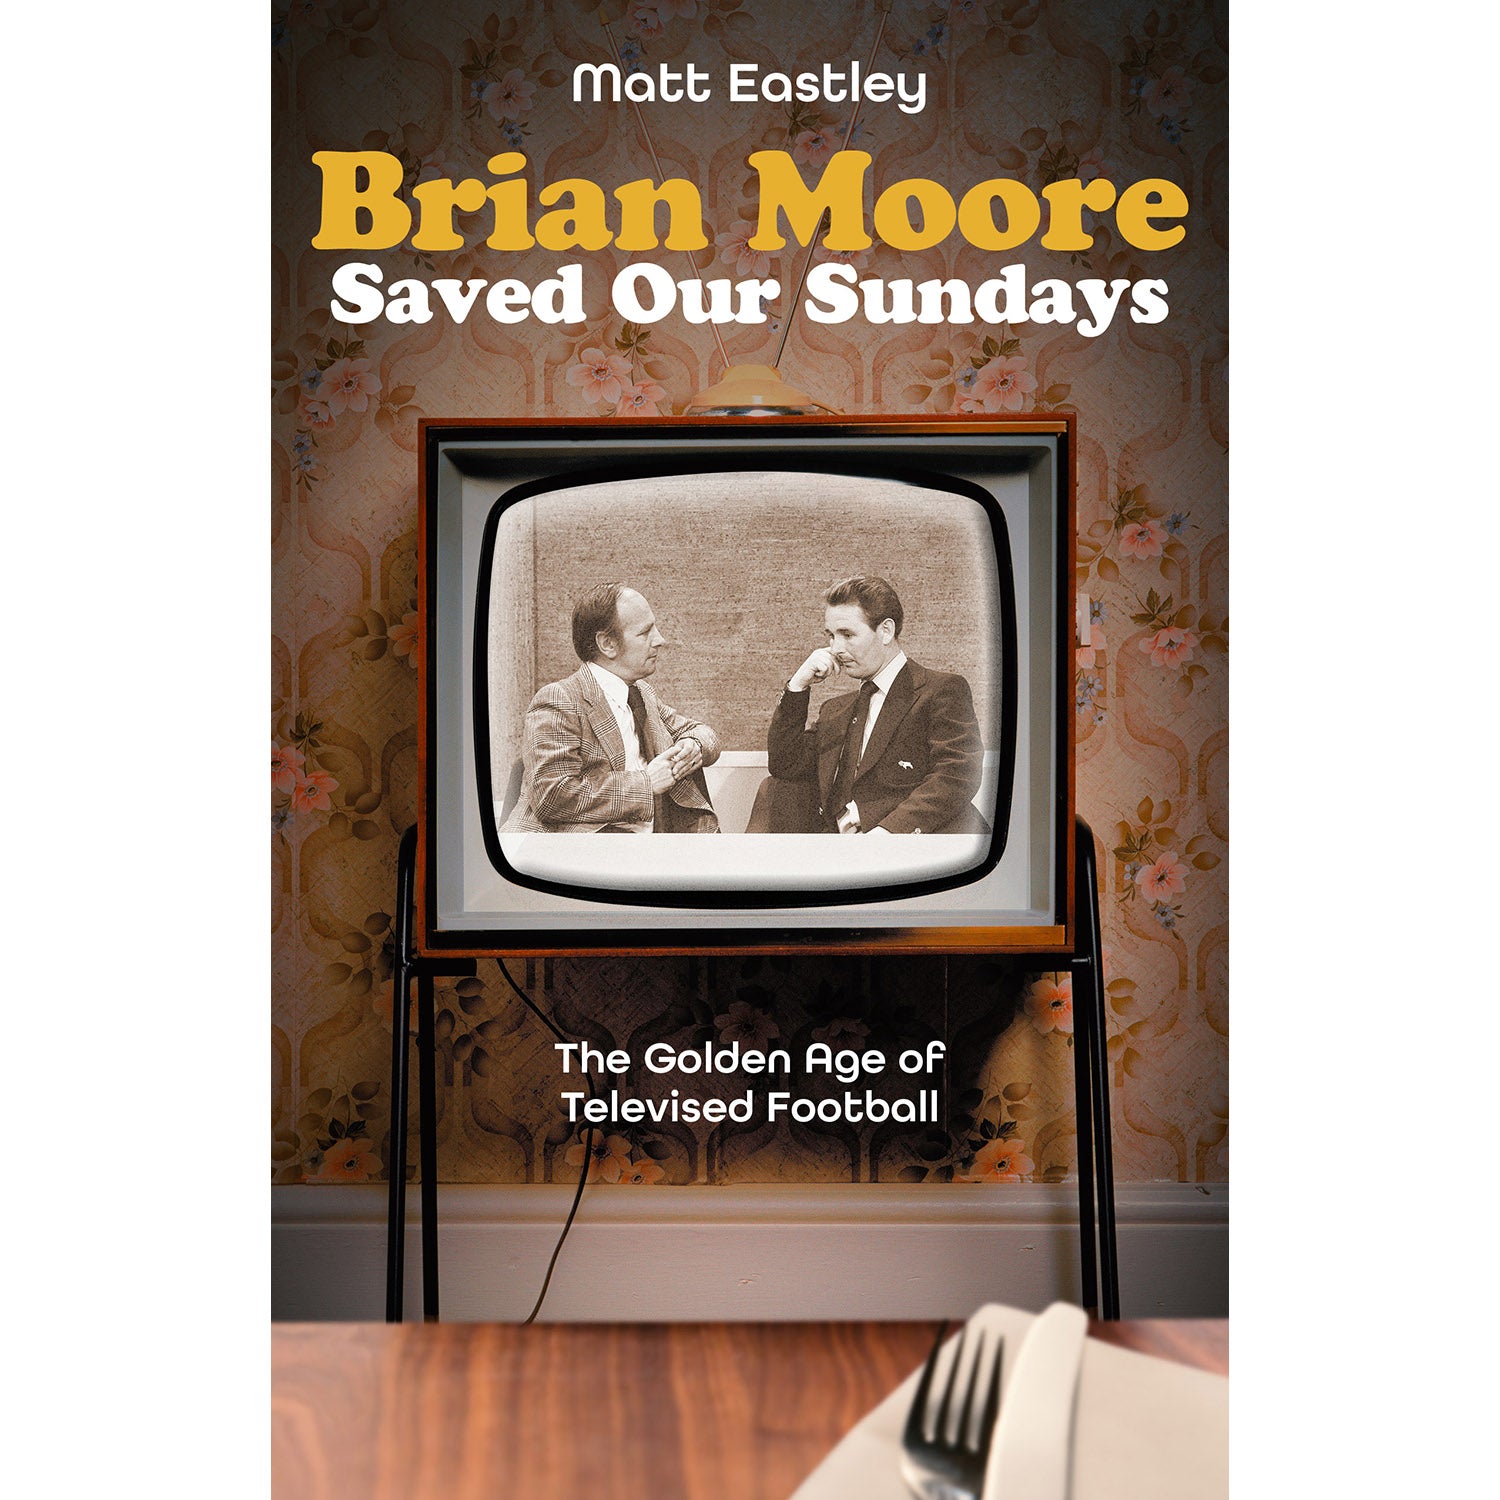 Brian Moore Saved Our Sundays – The Golden Age of Televised Football